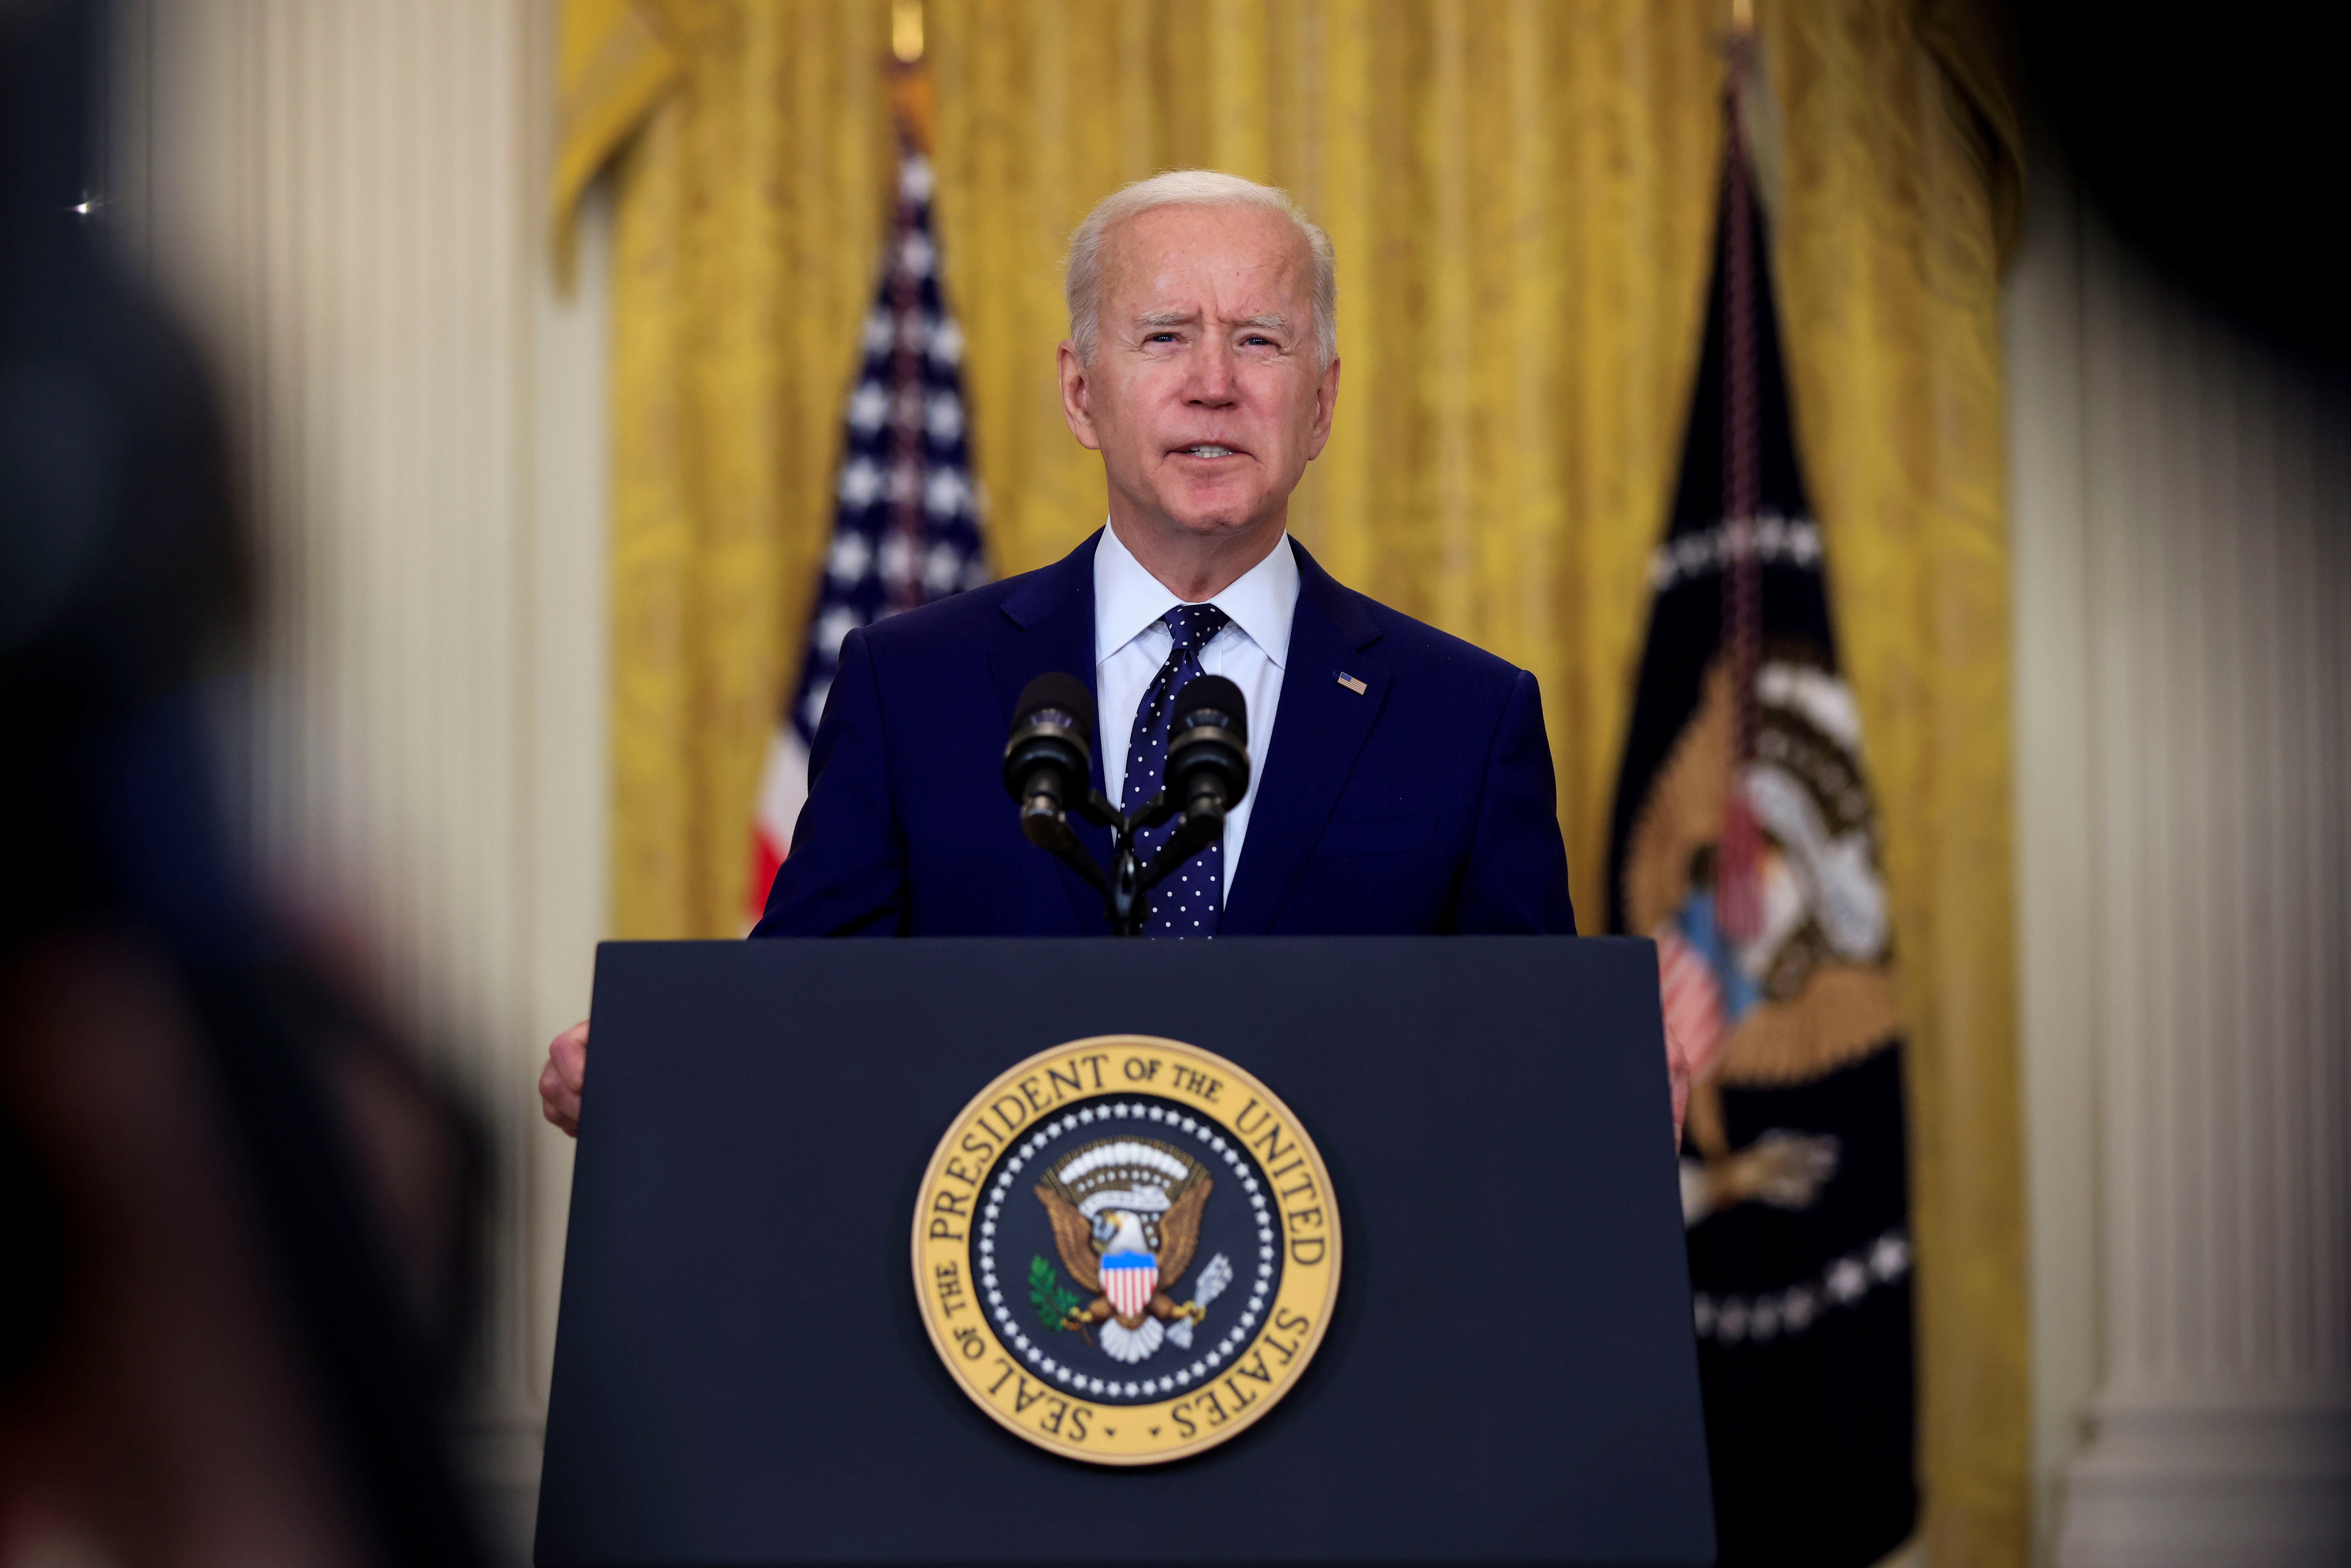 U.S. President Biden delivers remarks on Russia at the White House in Washington